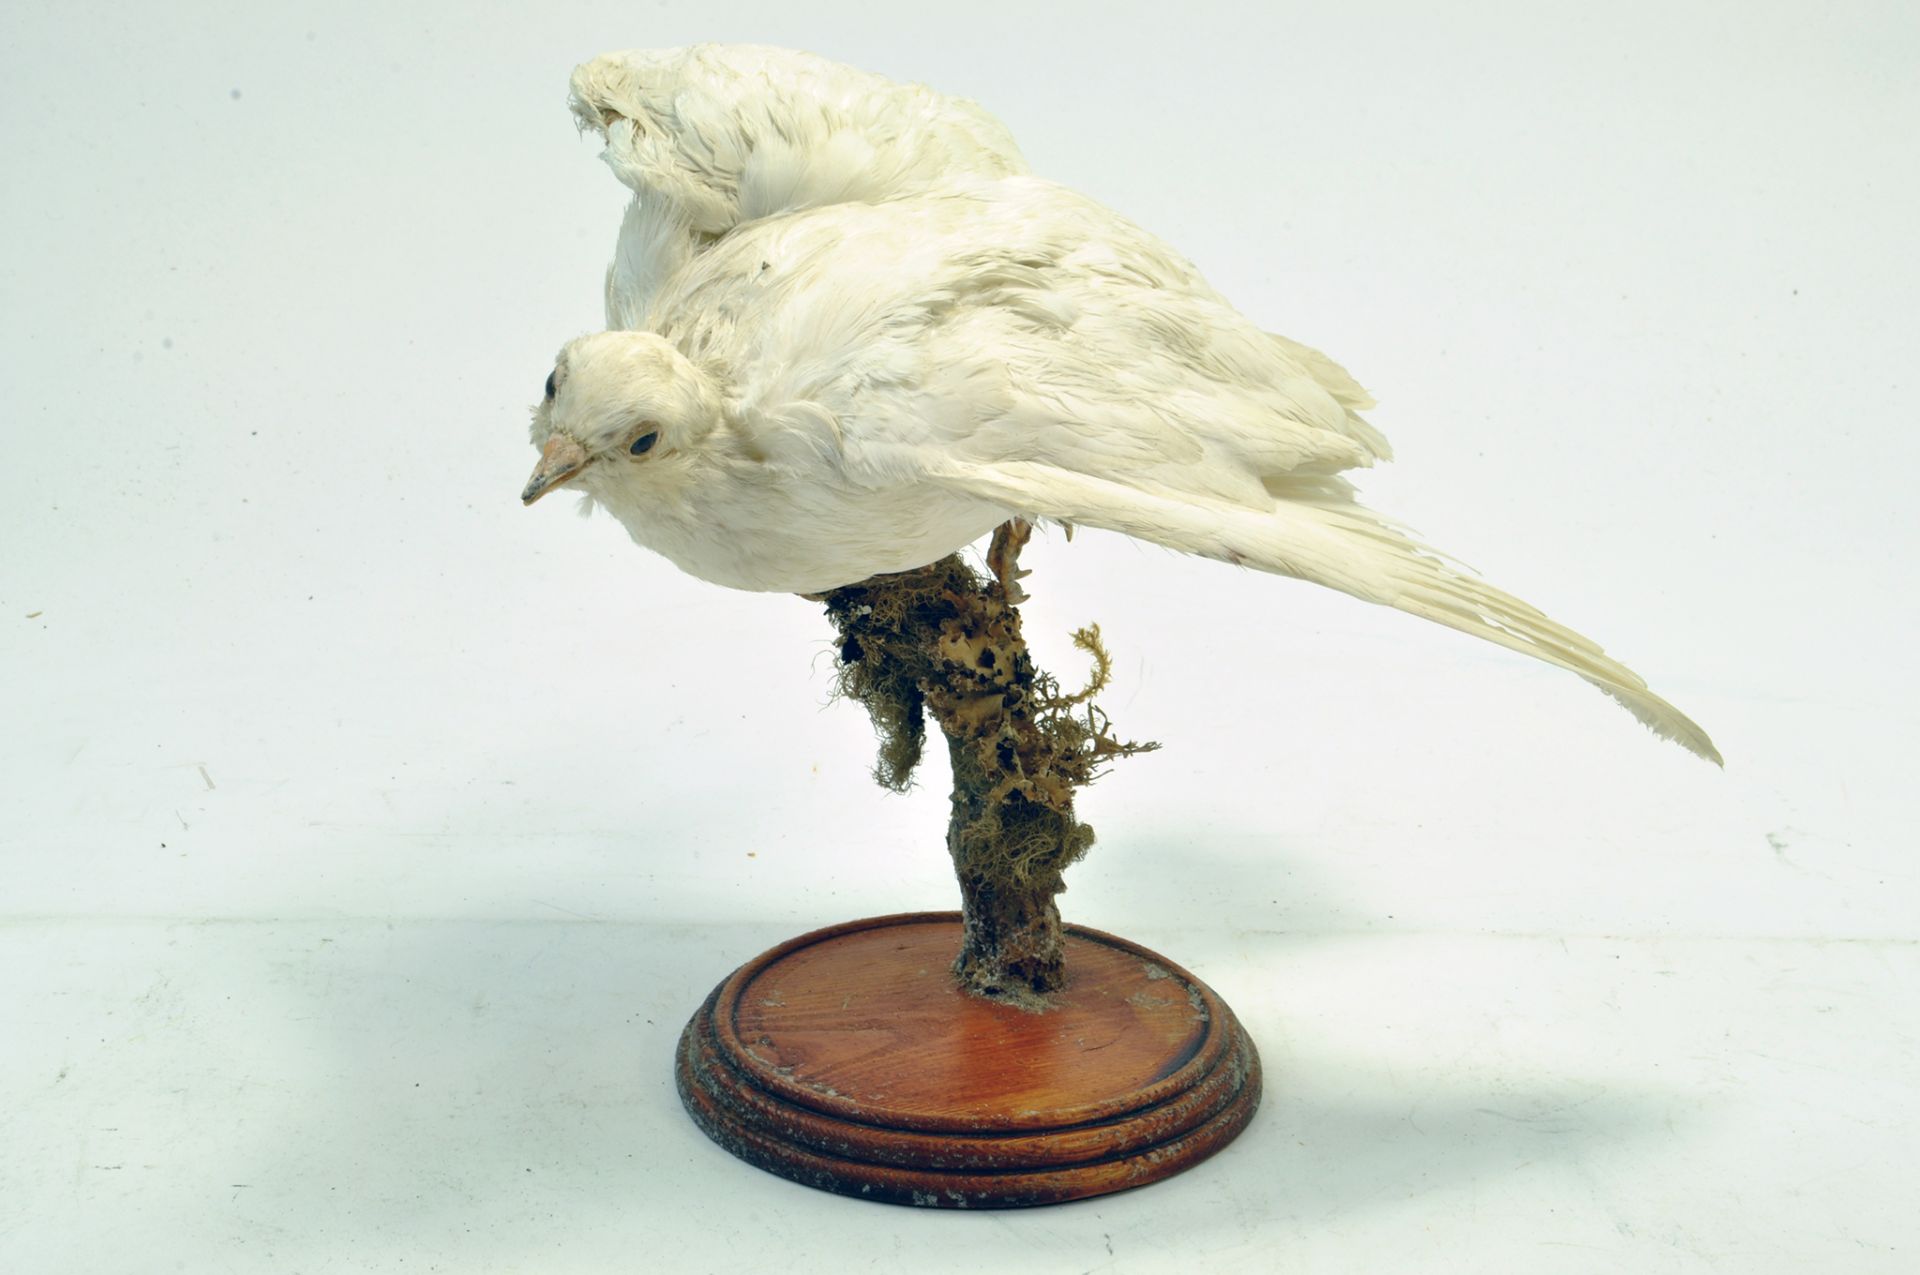 Taxidermy: An early 21st century example of a white dove (albino Columbidae), mounted on a log based